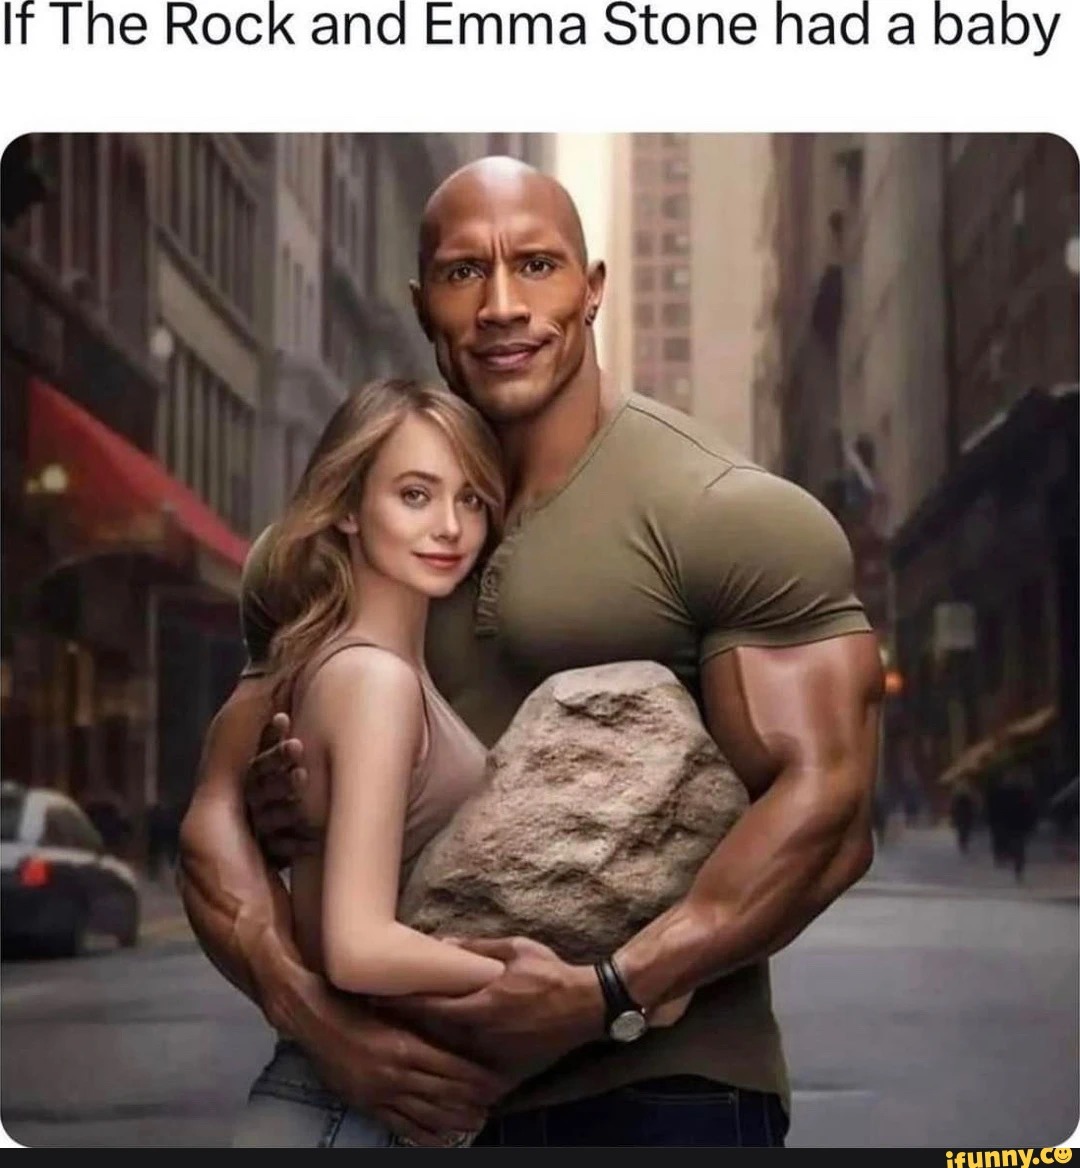 If The Rock and Emma Stone had a baby - Meme by HelsinkiBECH :) Memedroid